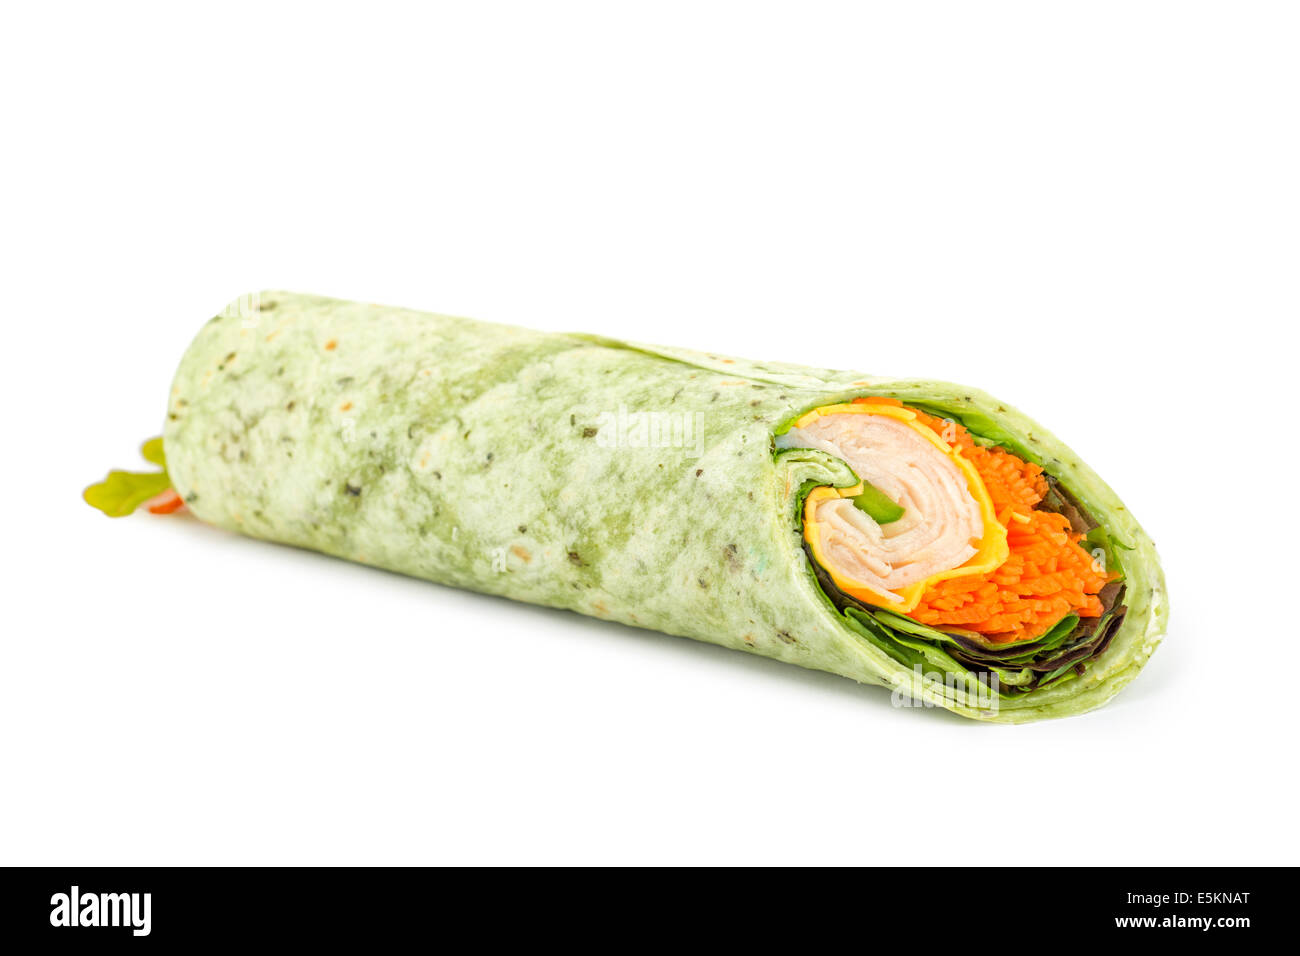 Spinach Tortilla Wrap, Chicken, Carrots, Cheese, Lettuce Stock Photo